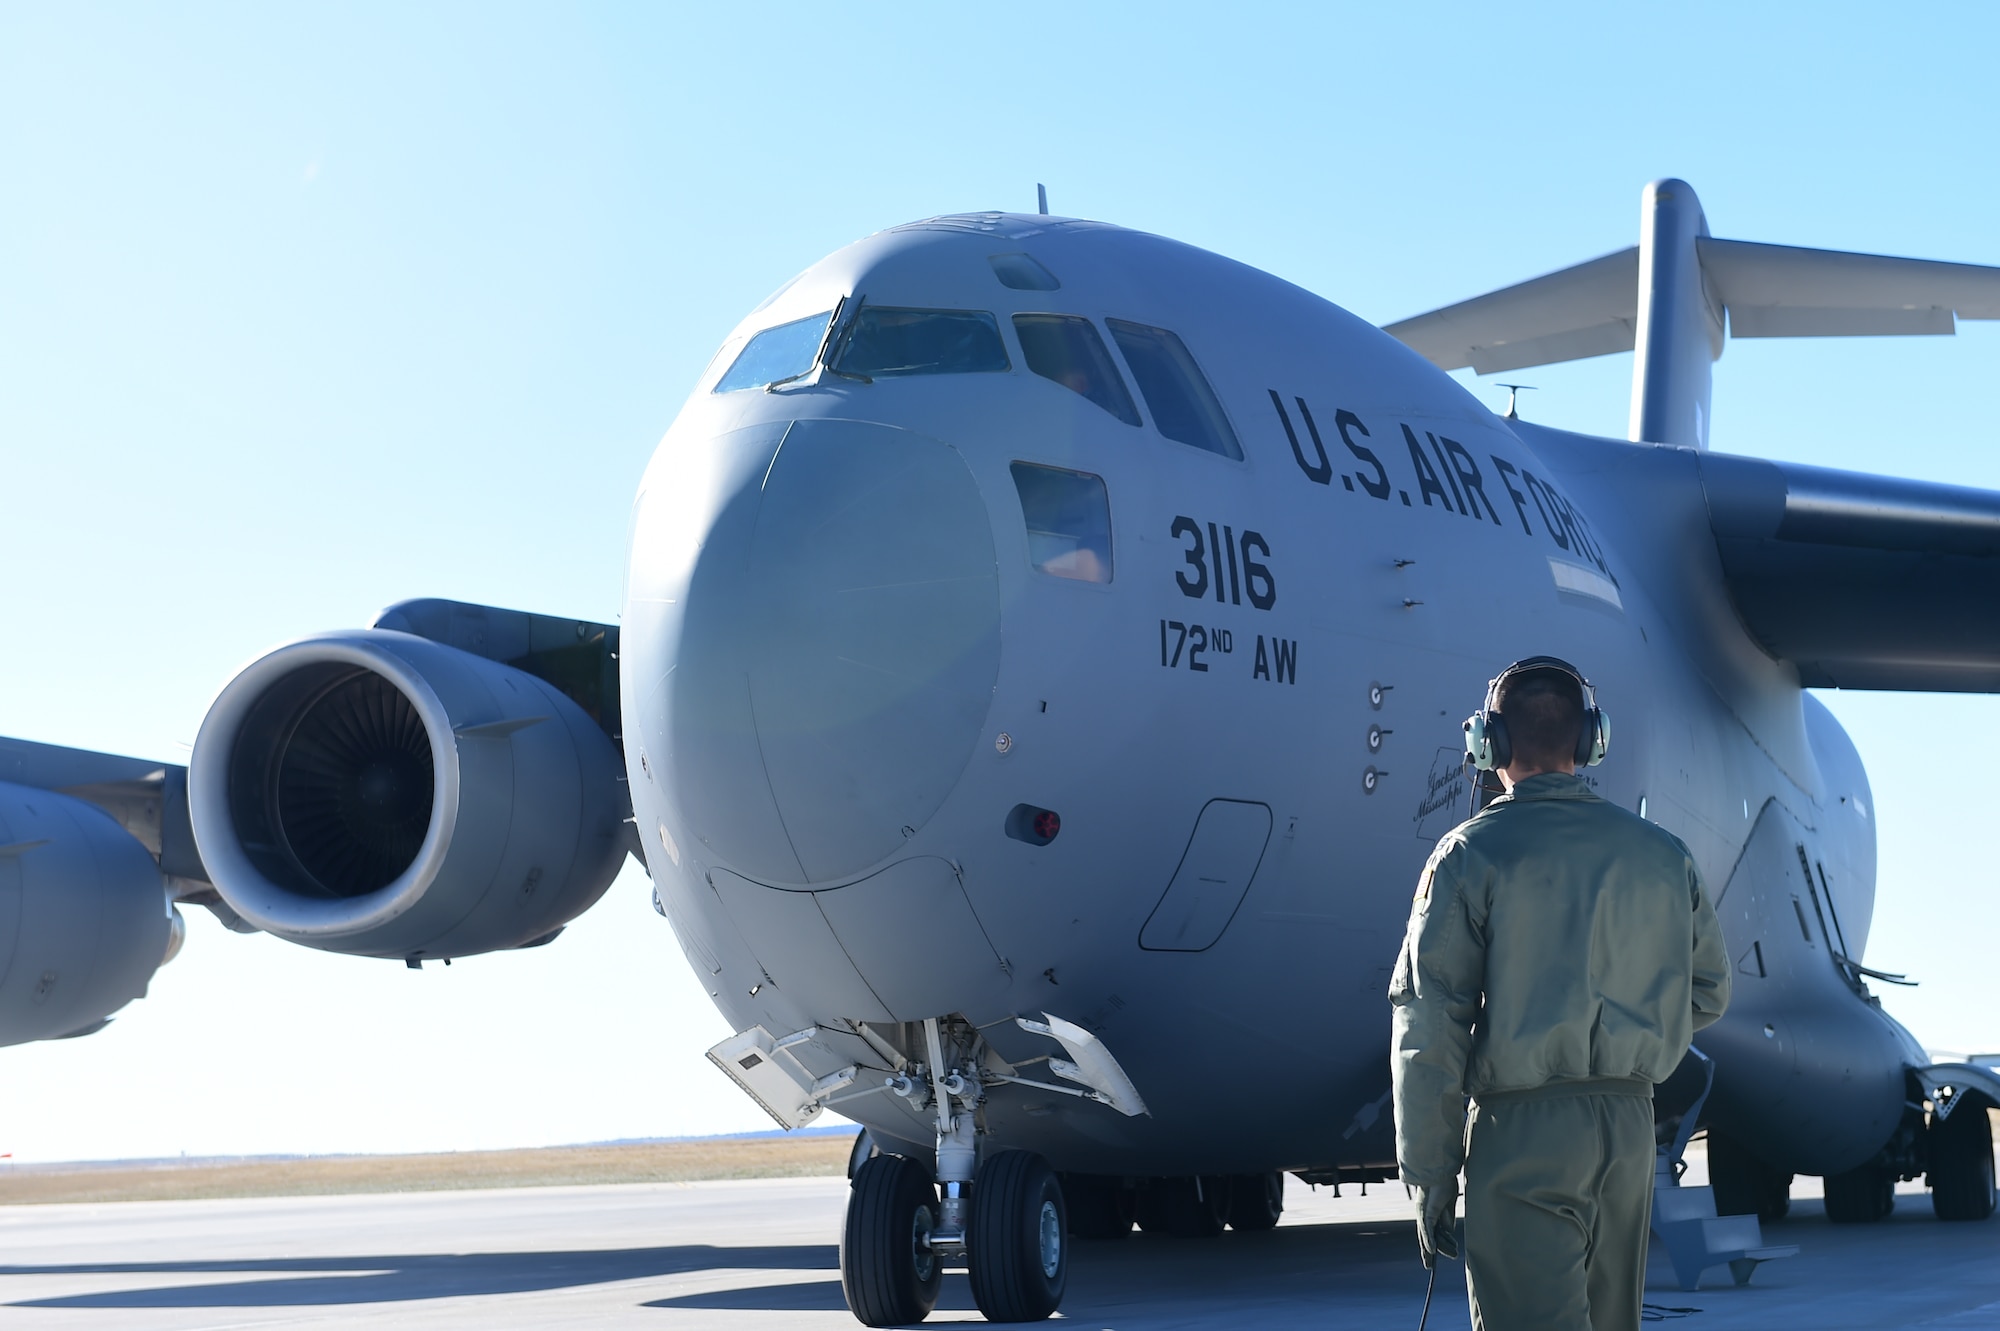 Capt. Canaan Barger, 172nd Airlift Wing co-pilot, inspects the engines of a C-17 Globemaster III March 16, 2016, on Buckley Air Force Base, Colo. The 172 Airlift Wing based at Jackson, Mississippi, is assisting the 140th Wing transport equipment to Tyndall AFB, Florida, for an exercise. (U.S. Air Force photo by Airman 1st Class Luke W. Nowakowski/Released) 